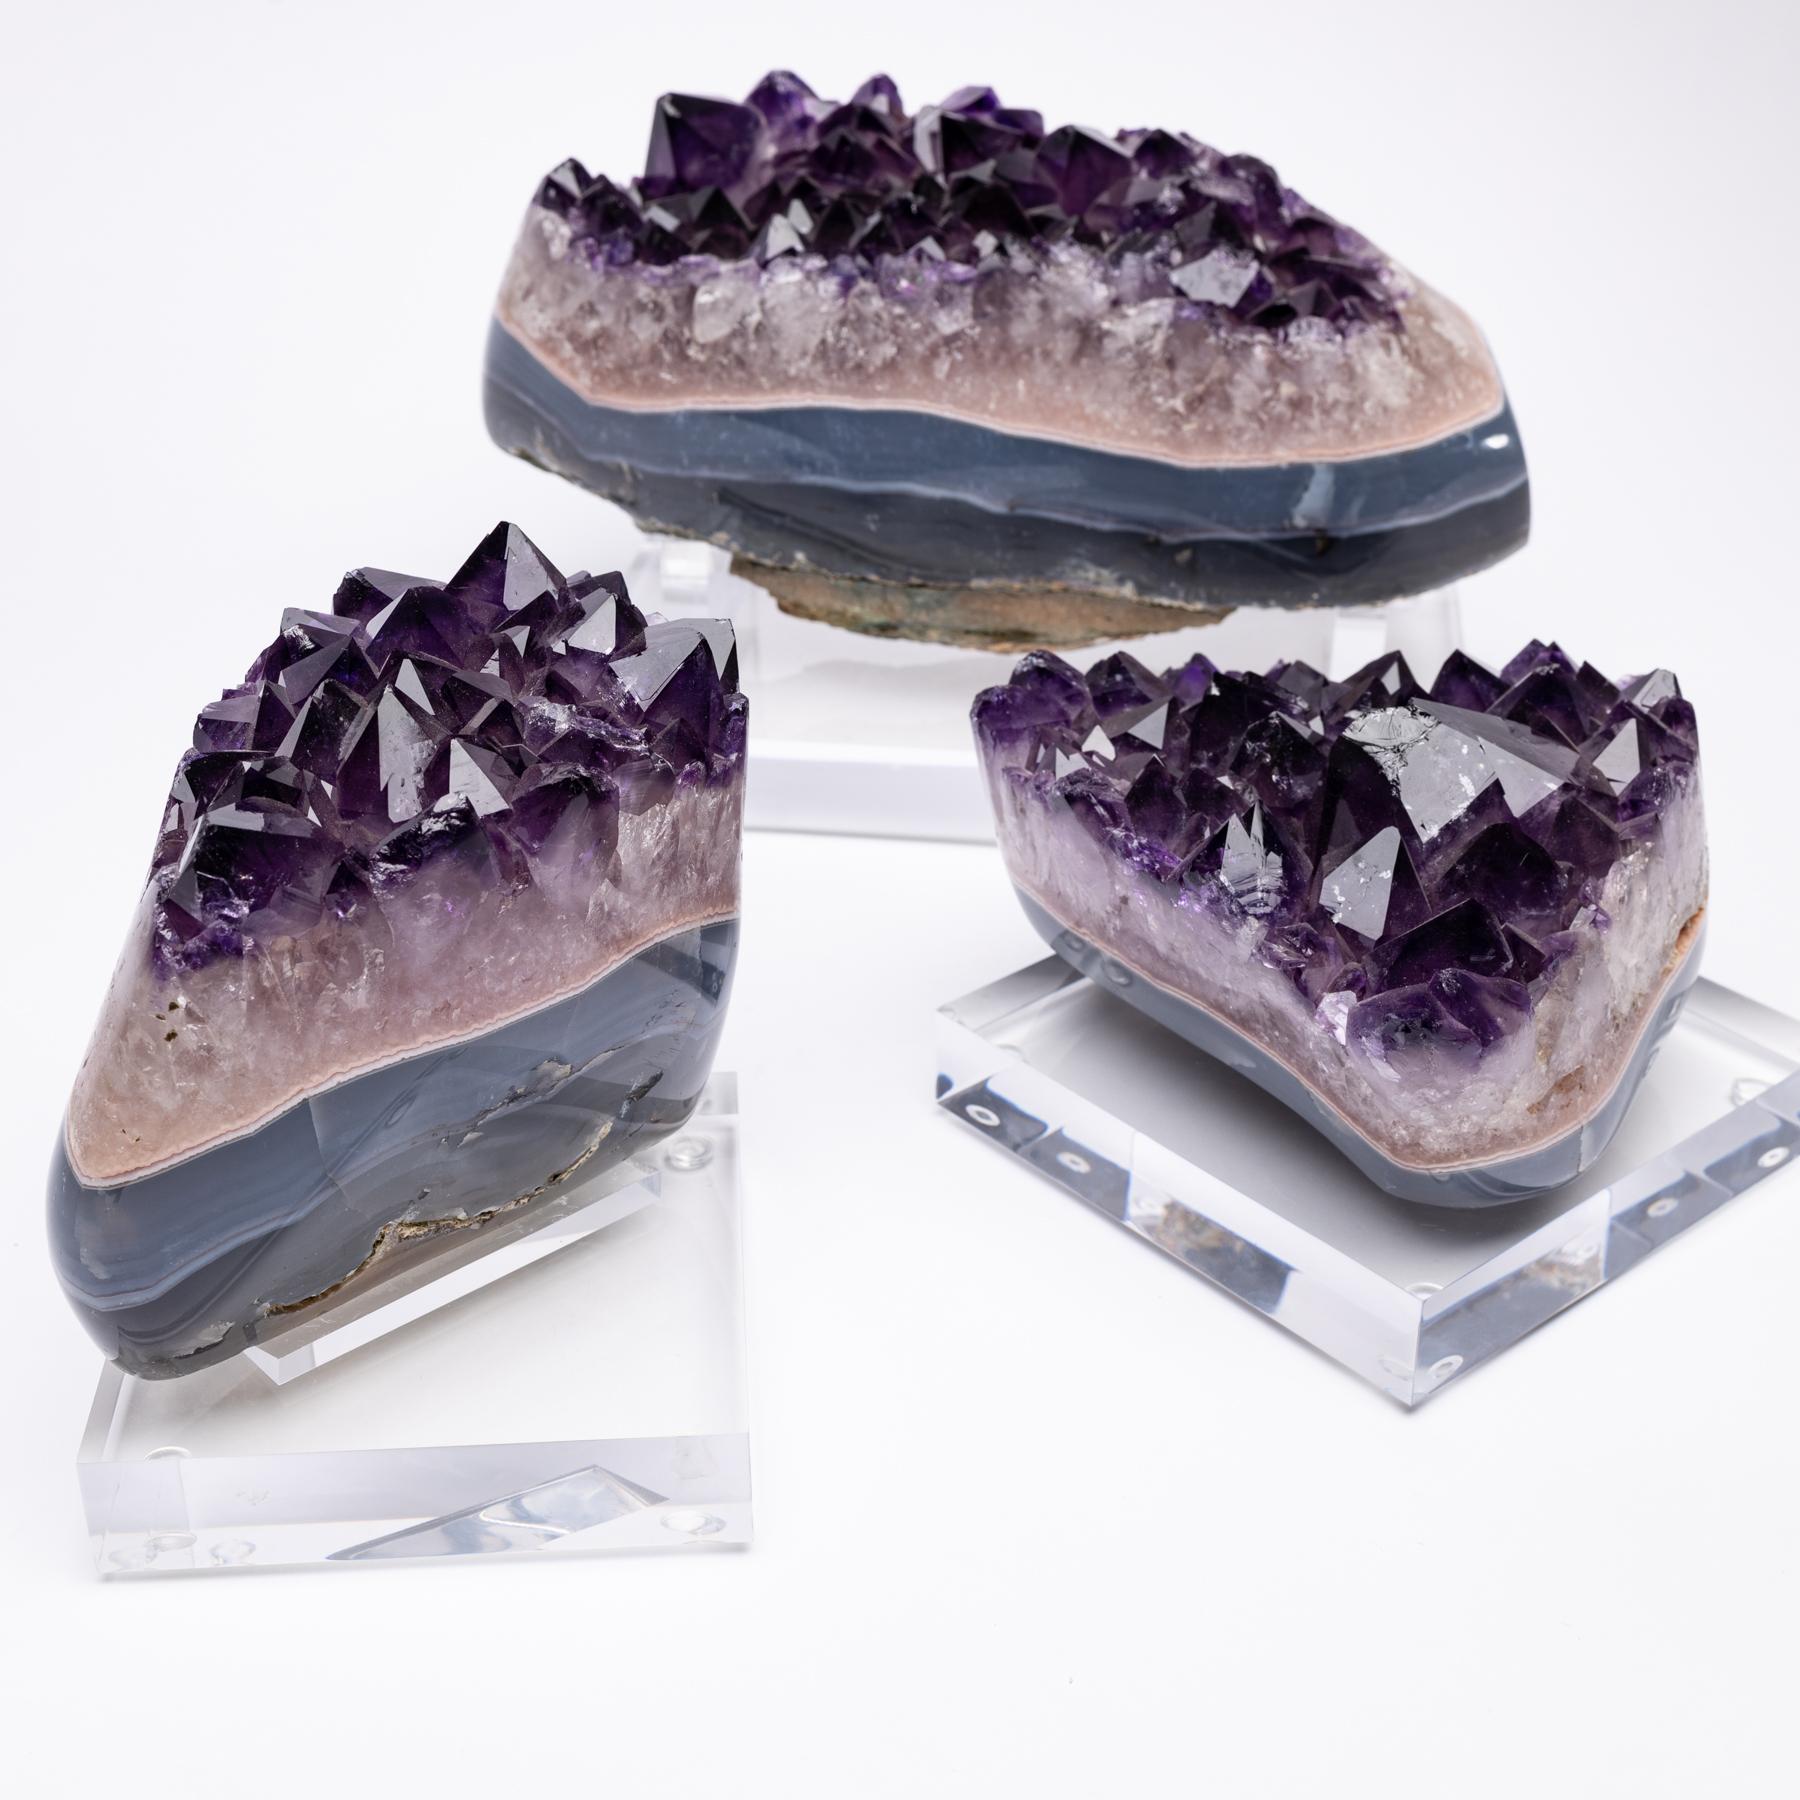 Uruguay Polished Agate with Amethysts Quartz Crystals Cluster on Acrylic Base 4